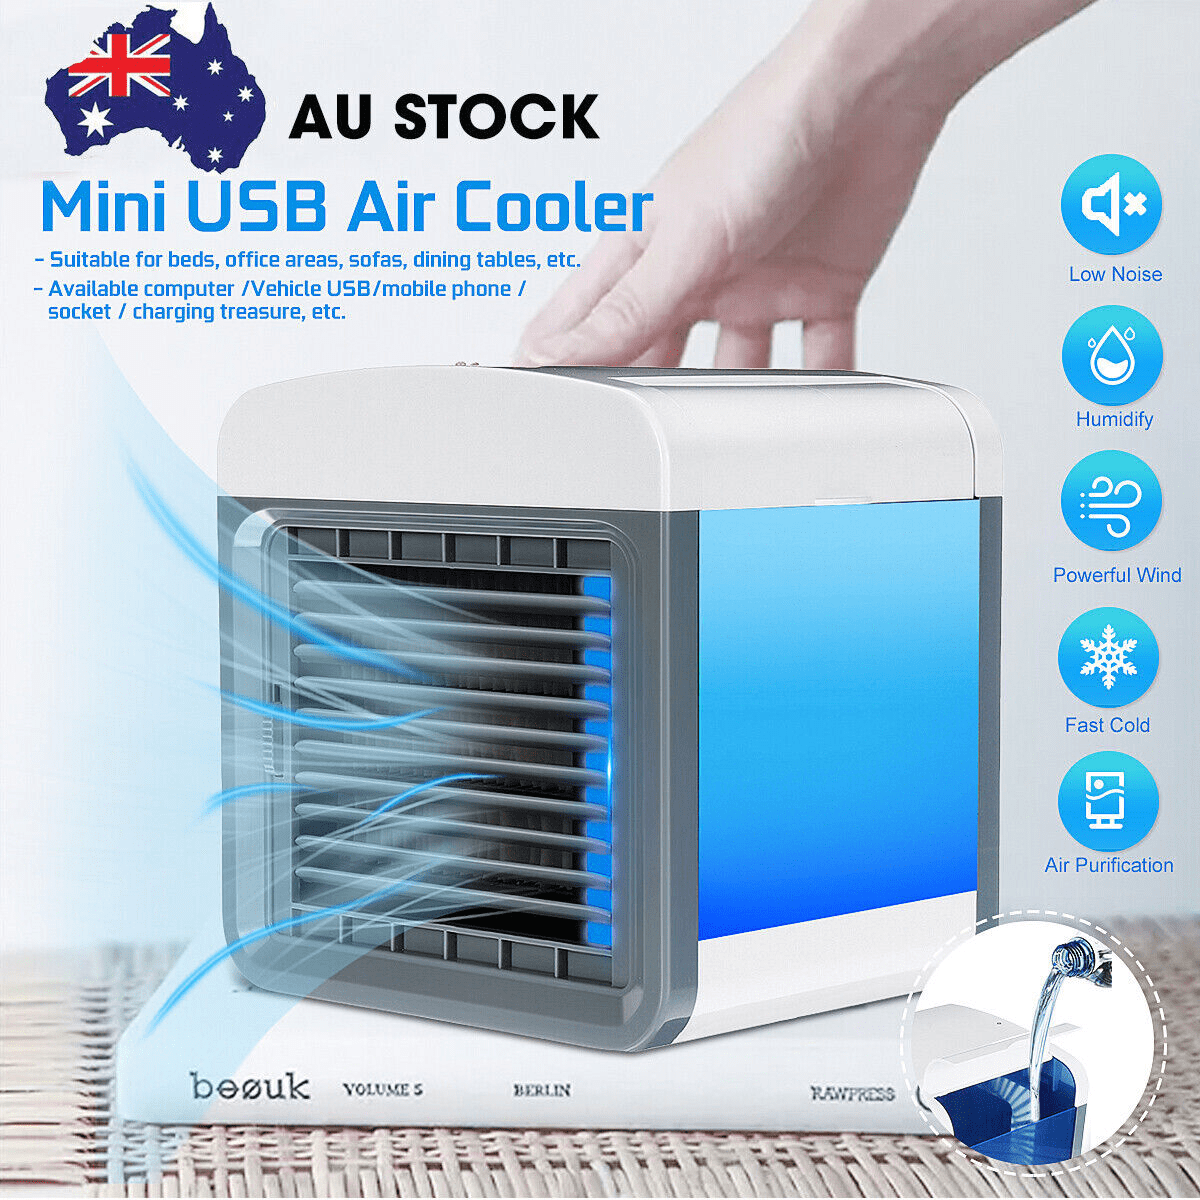 Small Portable Air Cooler Unit 12V Great for Camping, Caravans, Cars